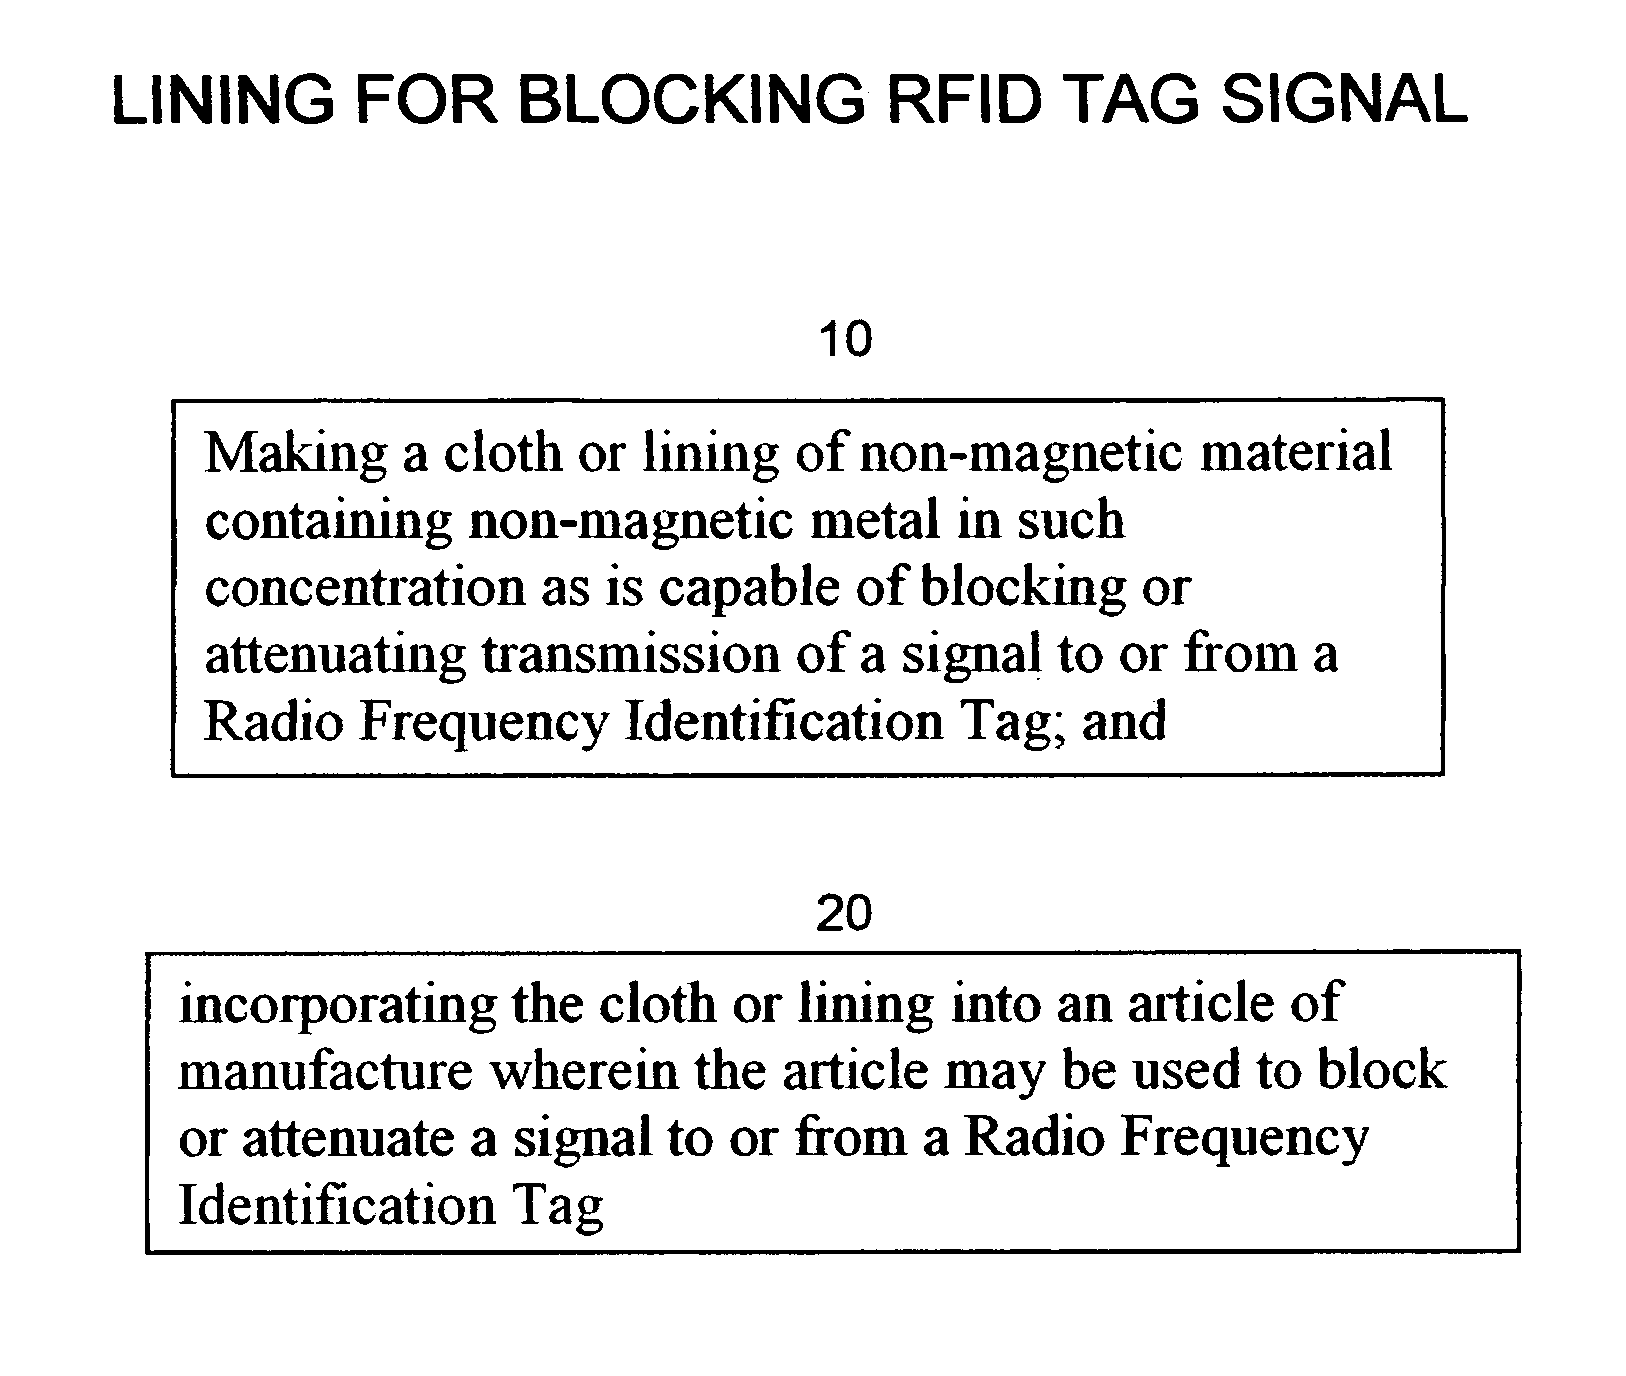 LINING FOR BLOCKING WI-FI, ULTRA-SOUND, LASER, VHF, UHF, BLUE TOOTH, AND RFlD TAG SIGNAL